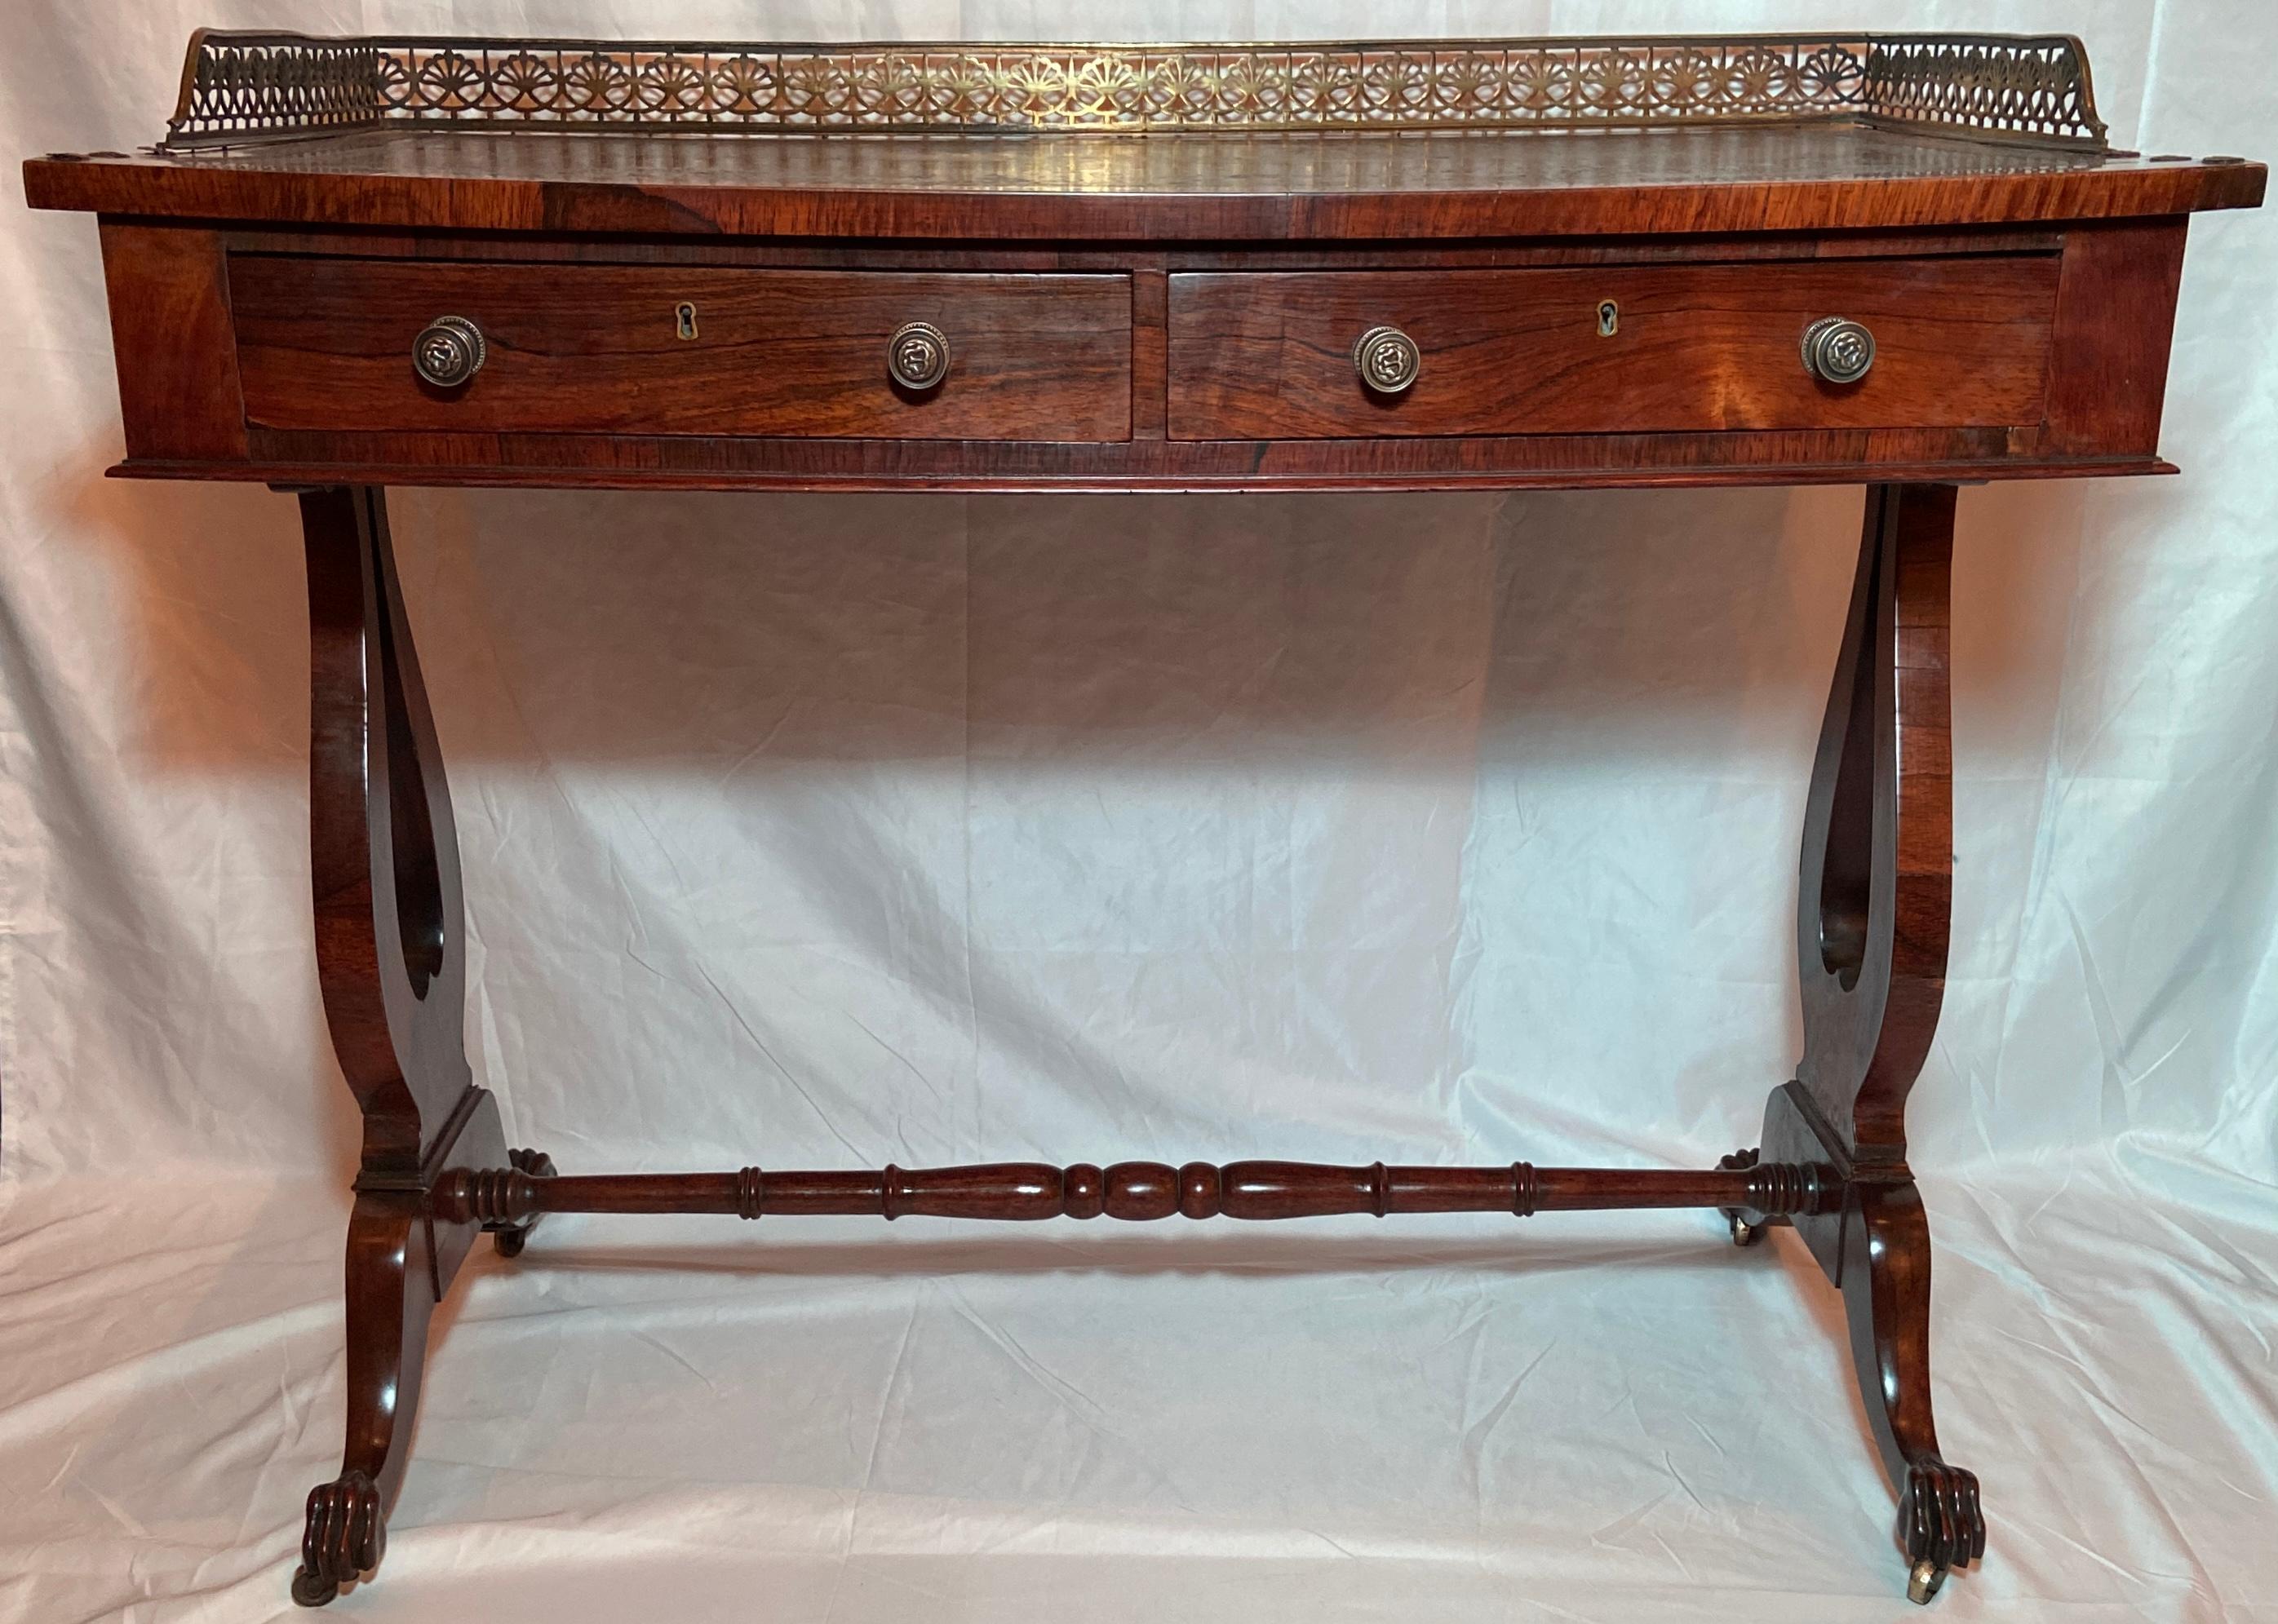 Antique English Regency Period Rosewood Writing Table, circa 1810-1820 In Good Condition For Sale In New Orleans, LA